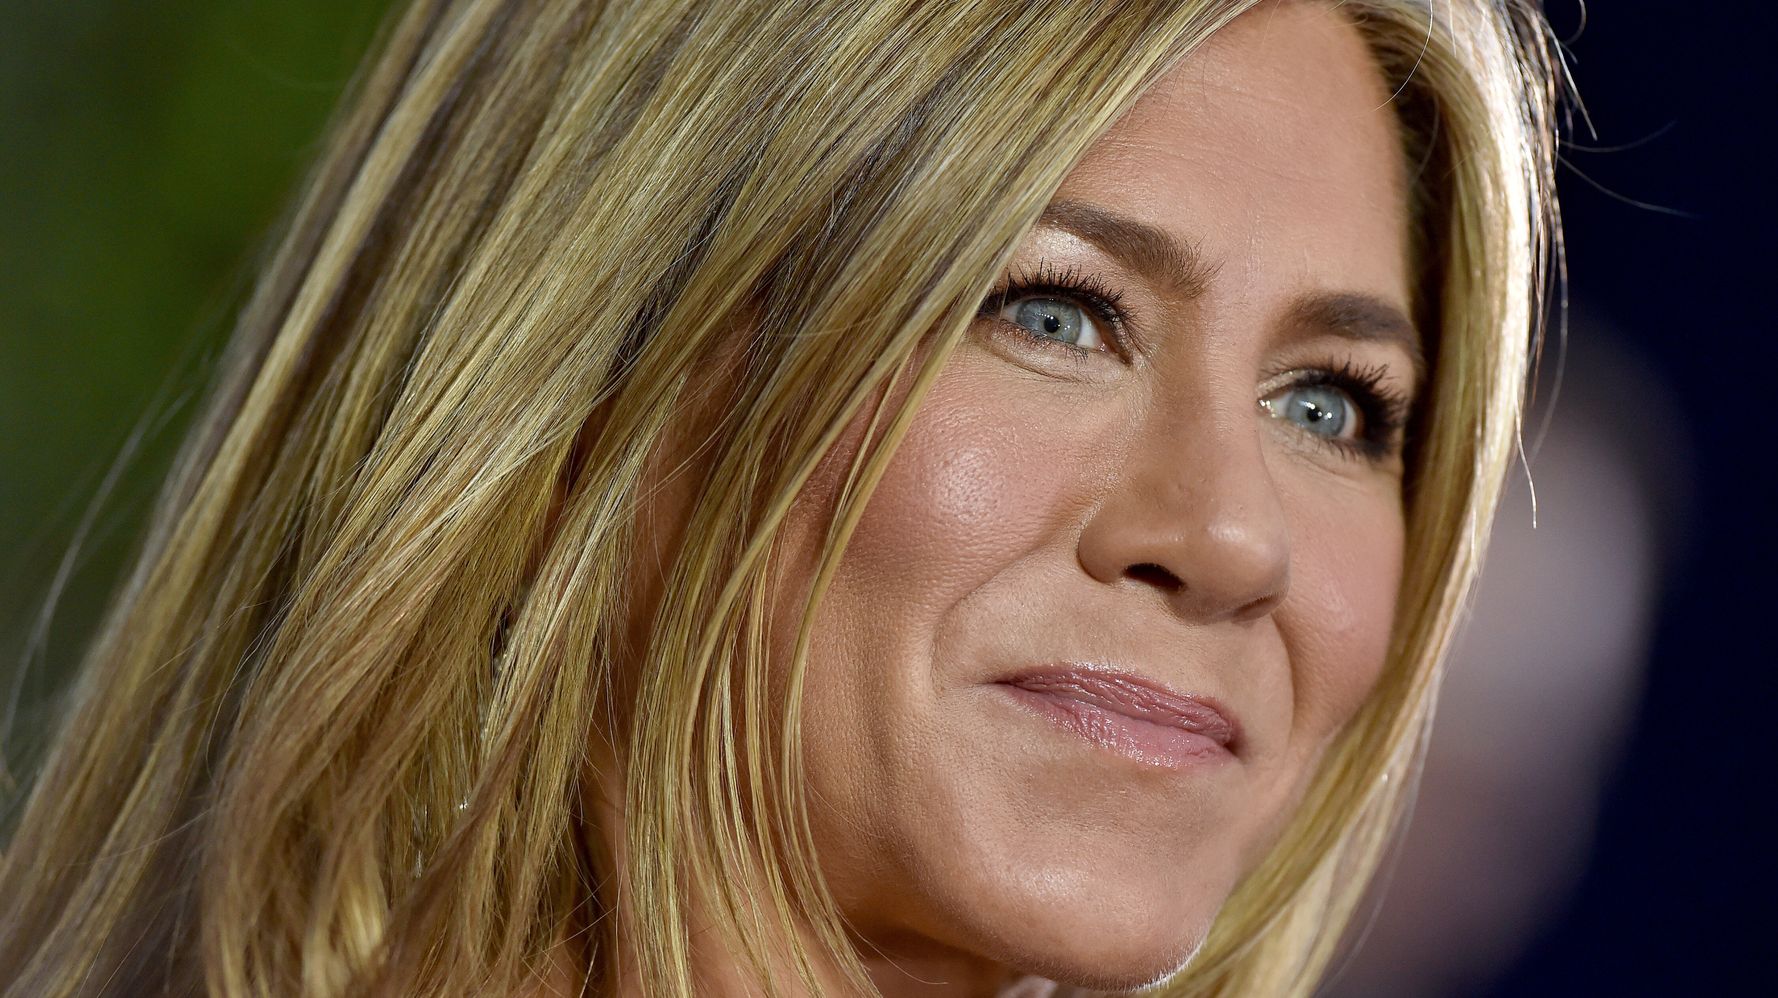 Jennifer Aniston Shares Behind-The-Scenes Photos From 'Friends' Reunion